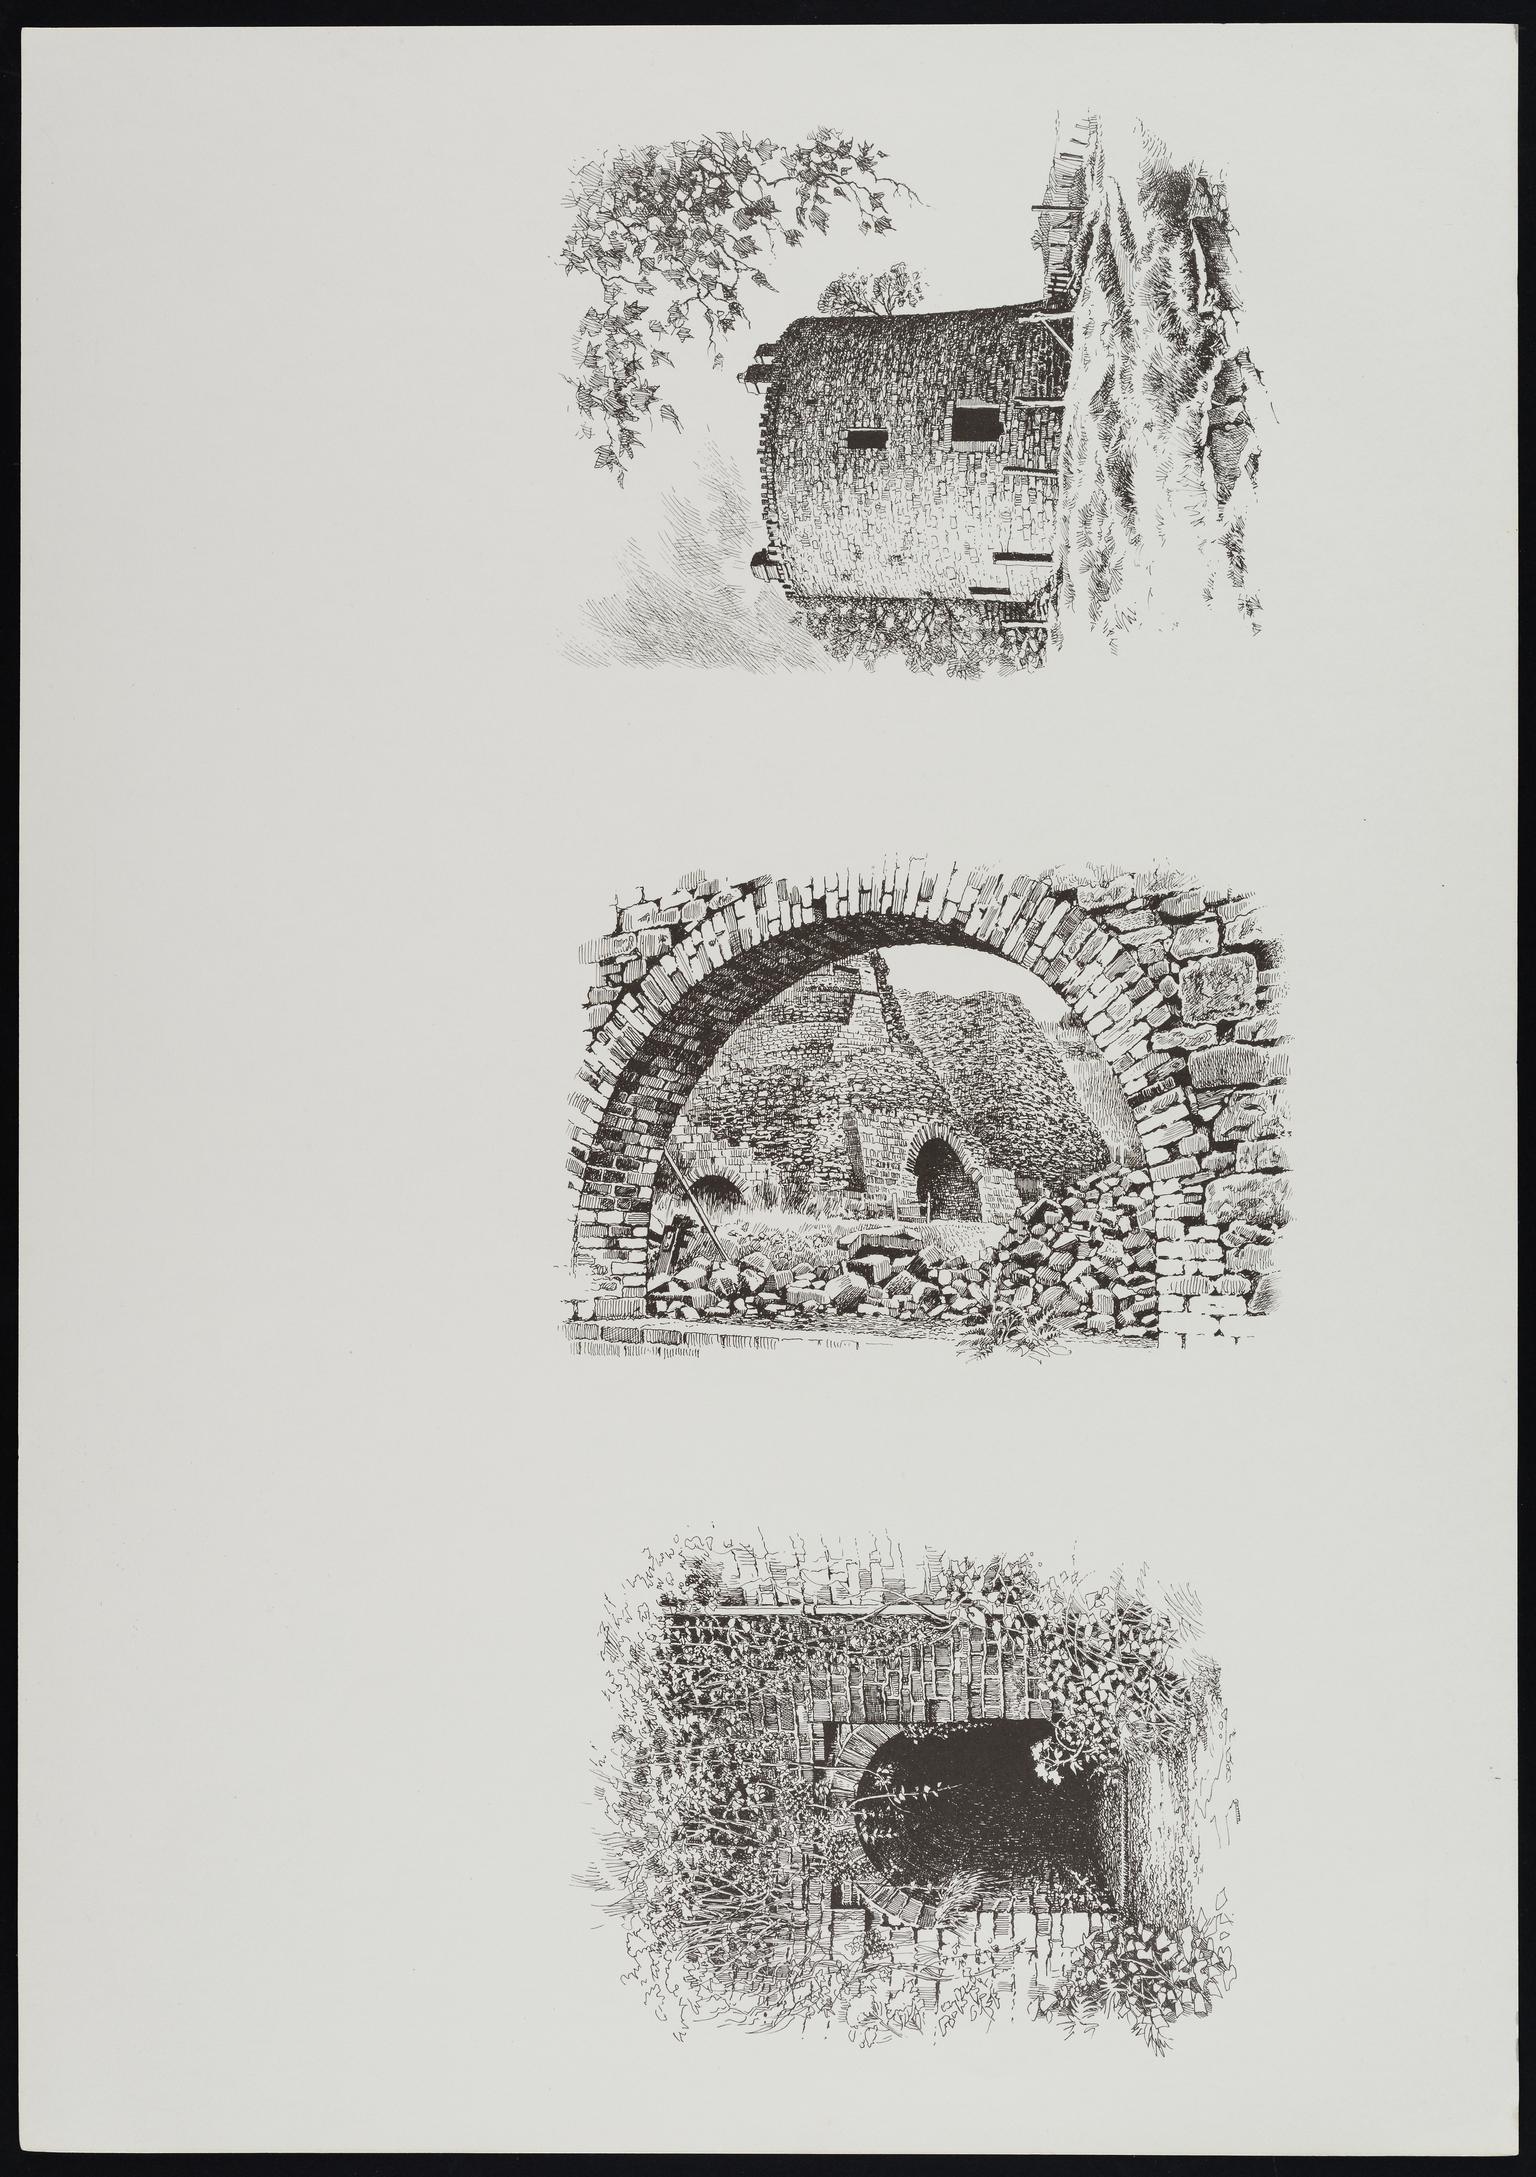 Three black and white prints on one sheet of paper.  Top print shows one of the round towers at Nantyglo. Middle print showing remains of Blaenafon ironworks. Bottom print showing the entrance to the tunnel that passes beneath the canal at Llanfoist Wharf.